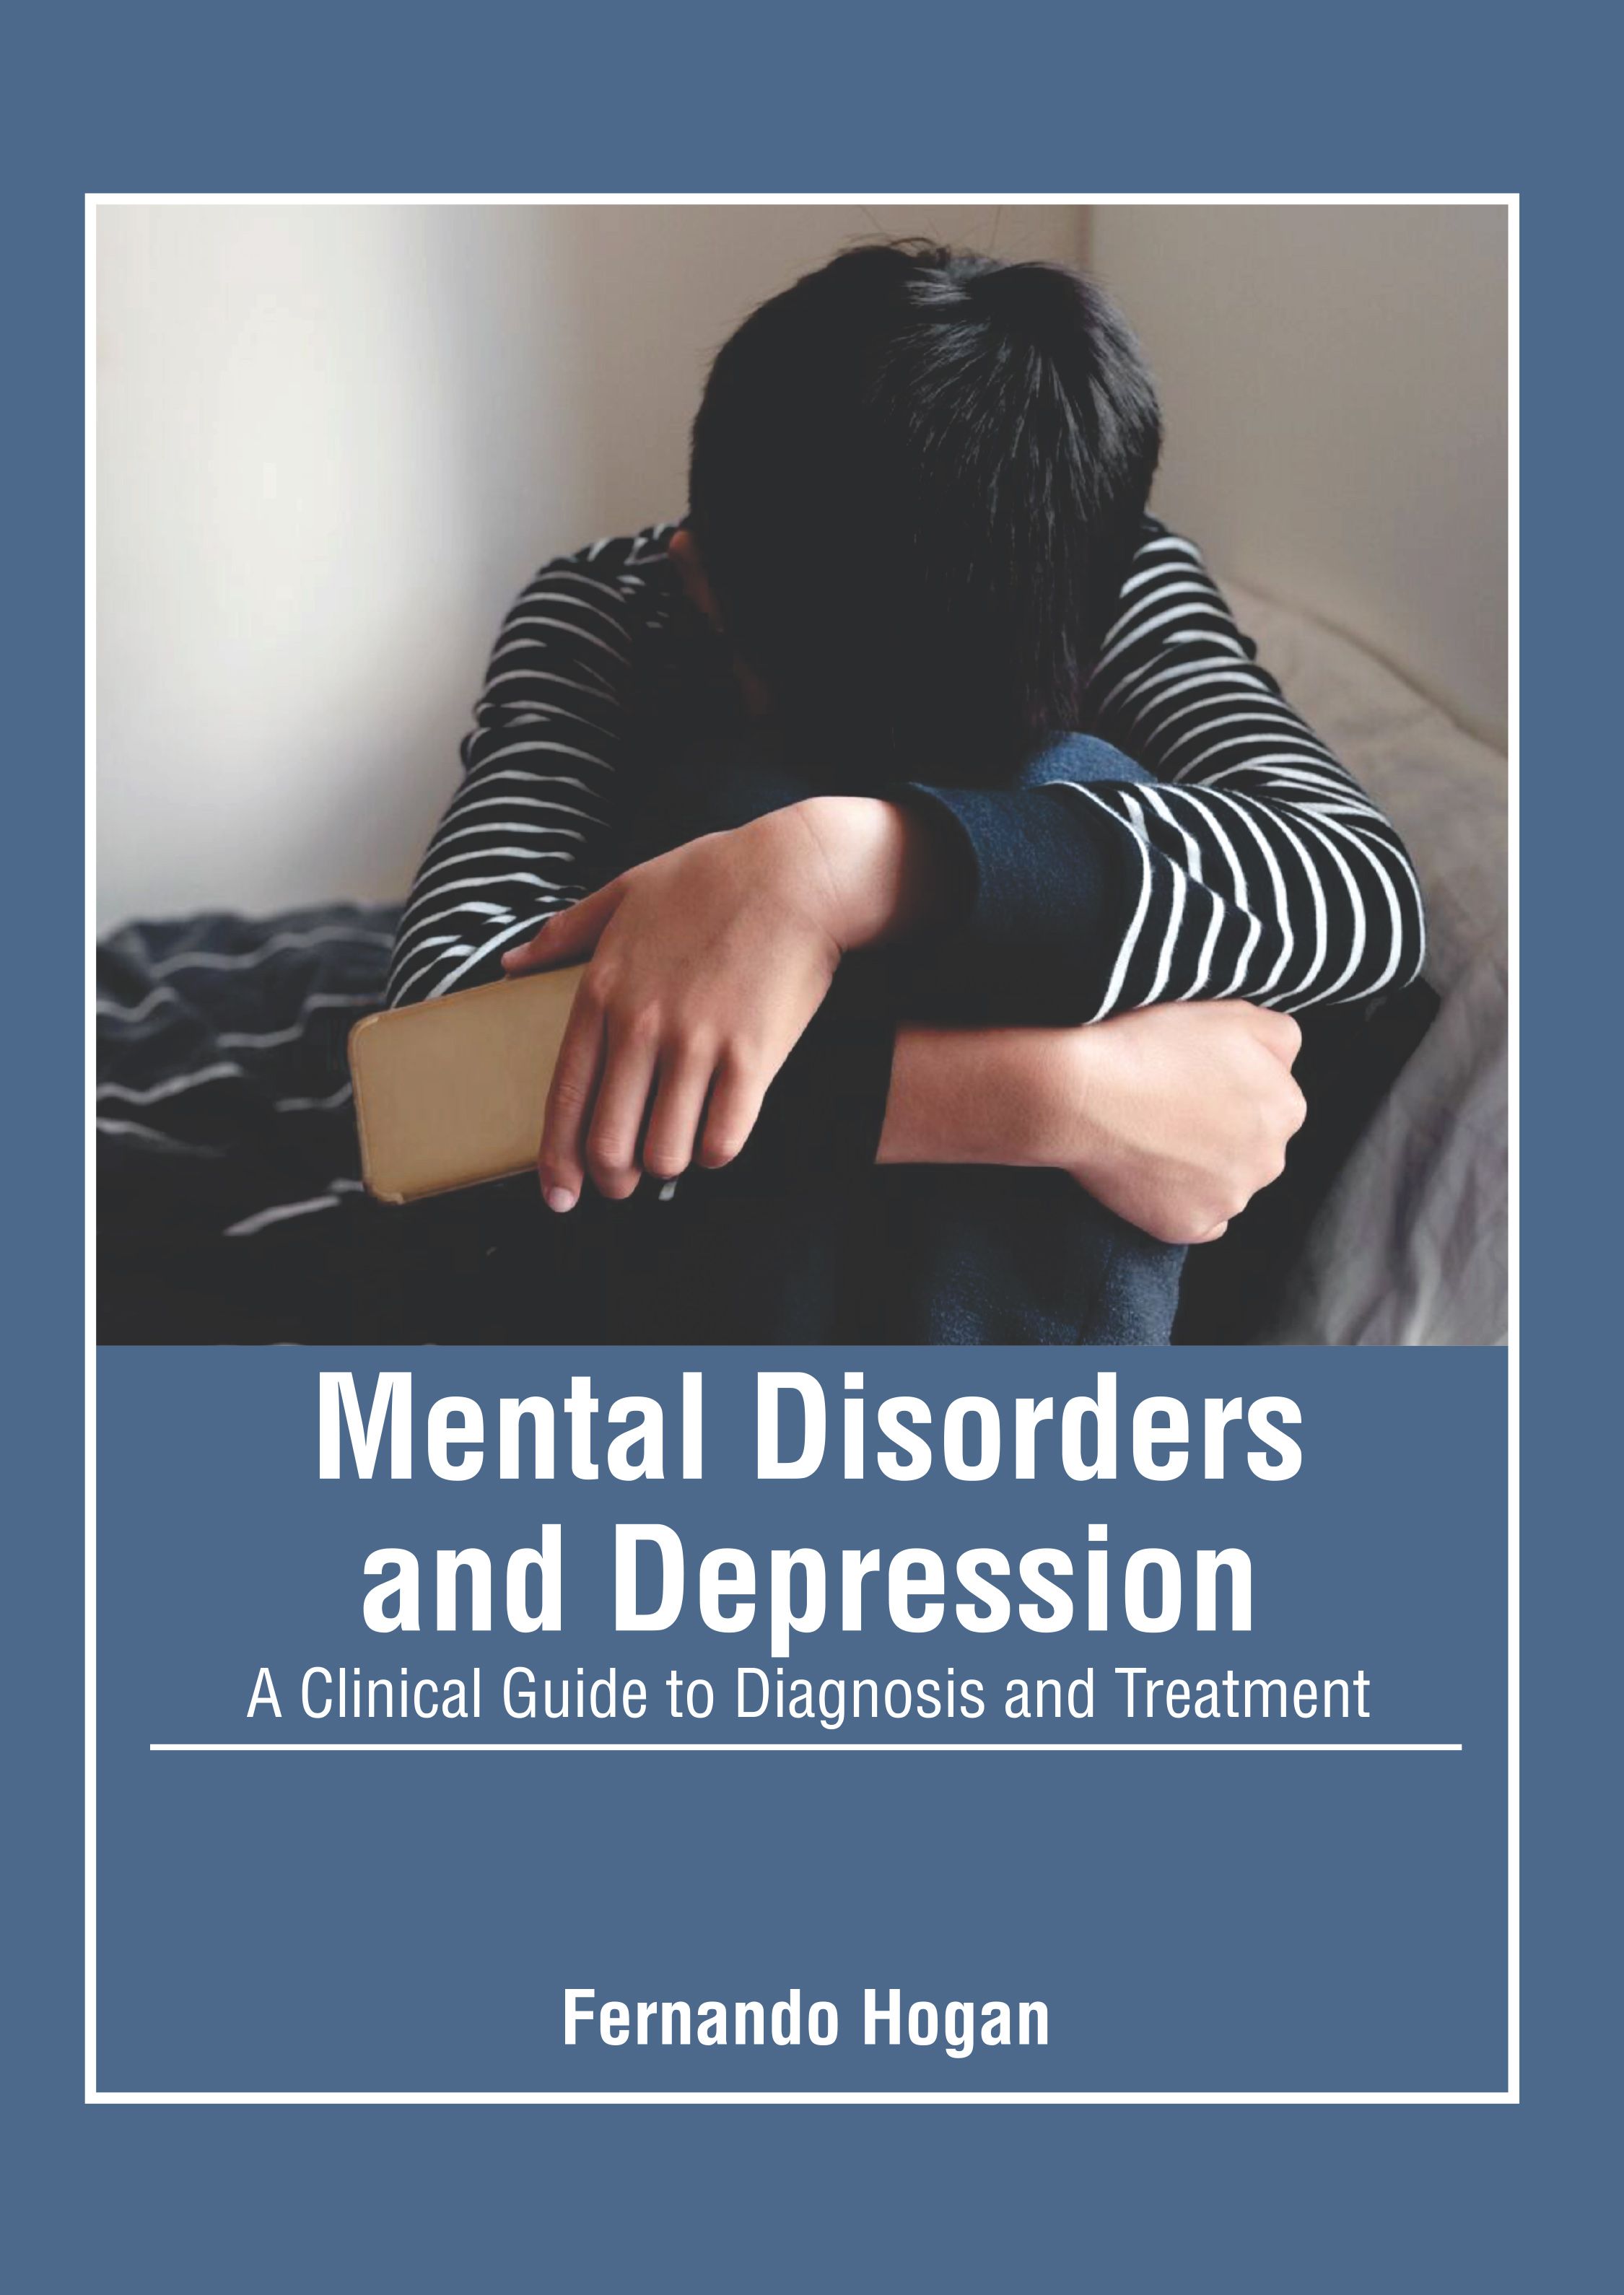 

medical-reference-books/psychiatry/mental-disorders-and-depression-a-clinical-guide-to-diagnosis-and-treatment-9798887402604